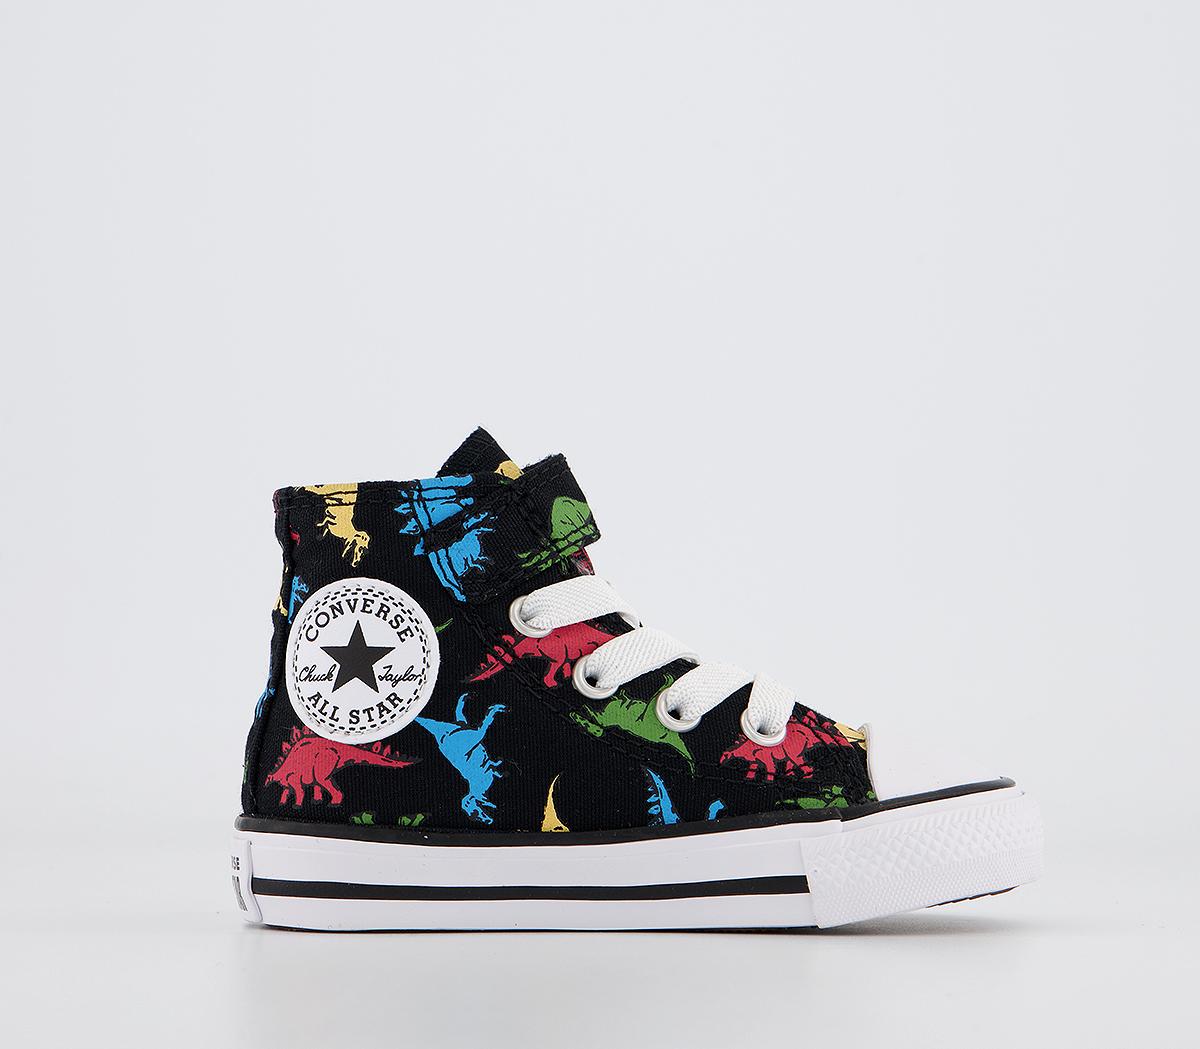 ConverseAll Star Hi 1vlace TrainersDinosaurs Black Red Baltic Blue White